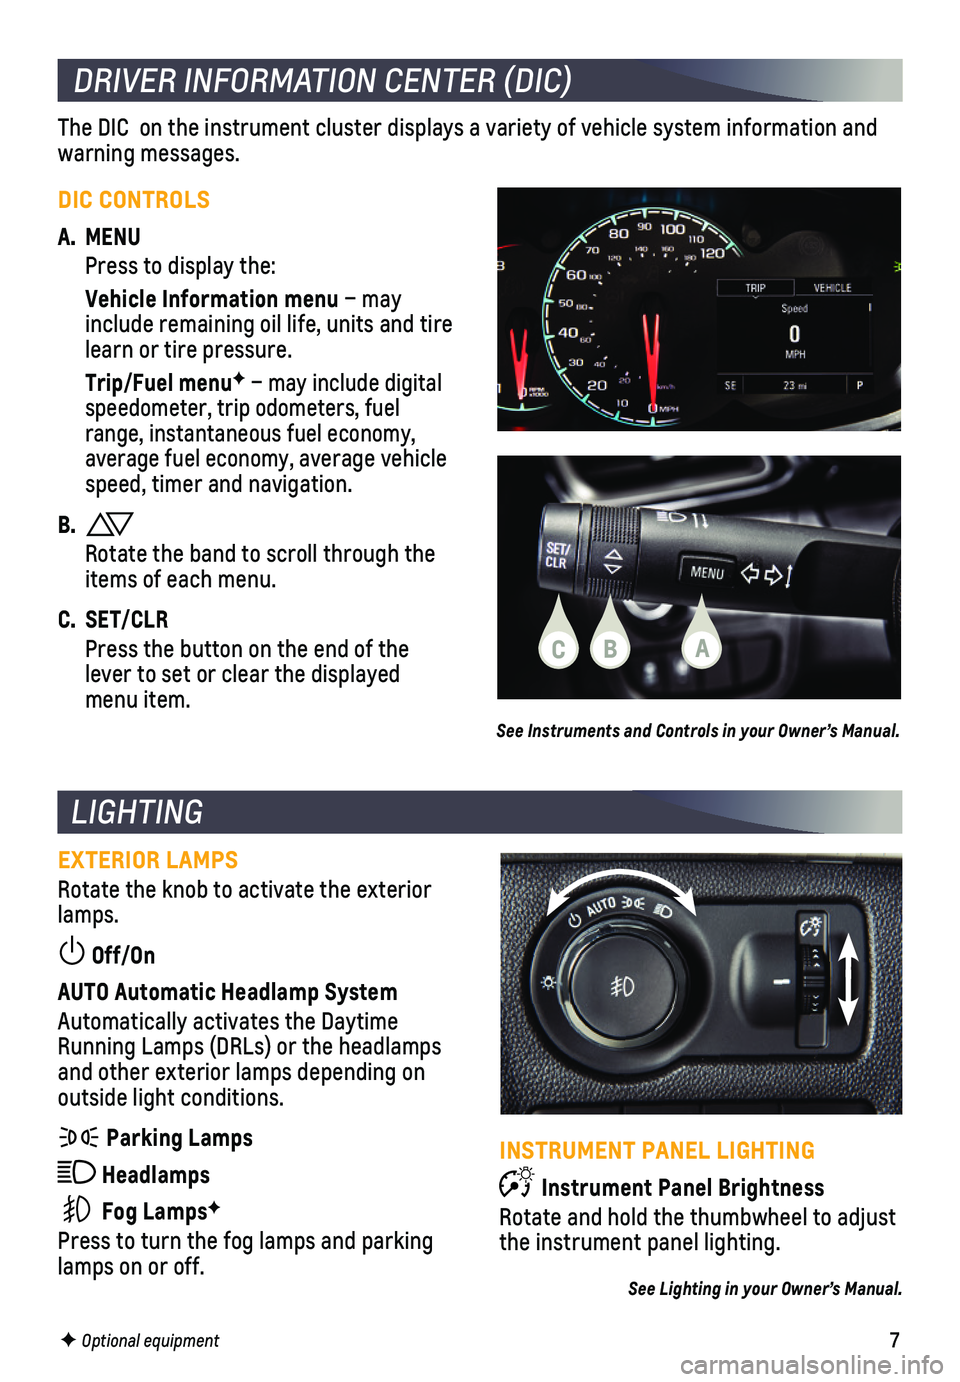 CHEVROLET SPARK 2019  Get To Know Guide 7
LIGHTING
EXTERIOR LAMPS
Rotate the knob to activate the exterior lamps.
 Off/On 
AUTO Automatic Headlamp System
Automatically activates the Daytime Running Lamps (DRLs) or the headlamps and other ex